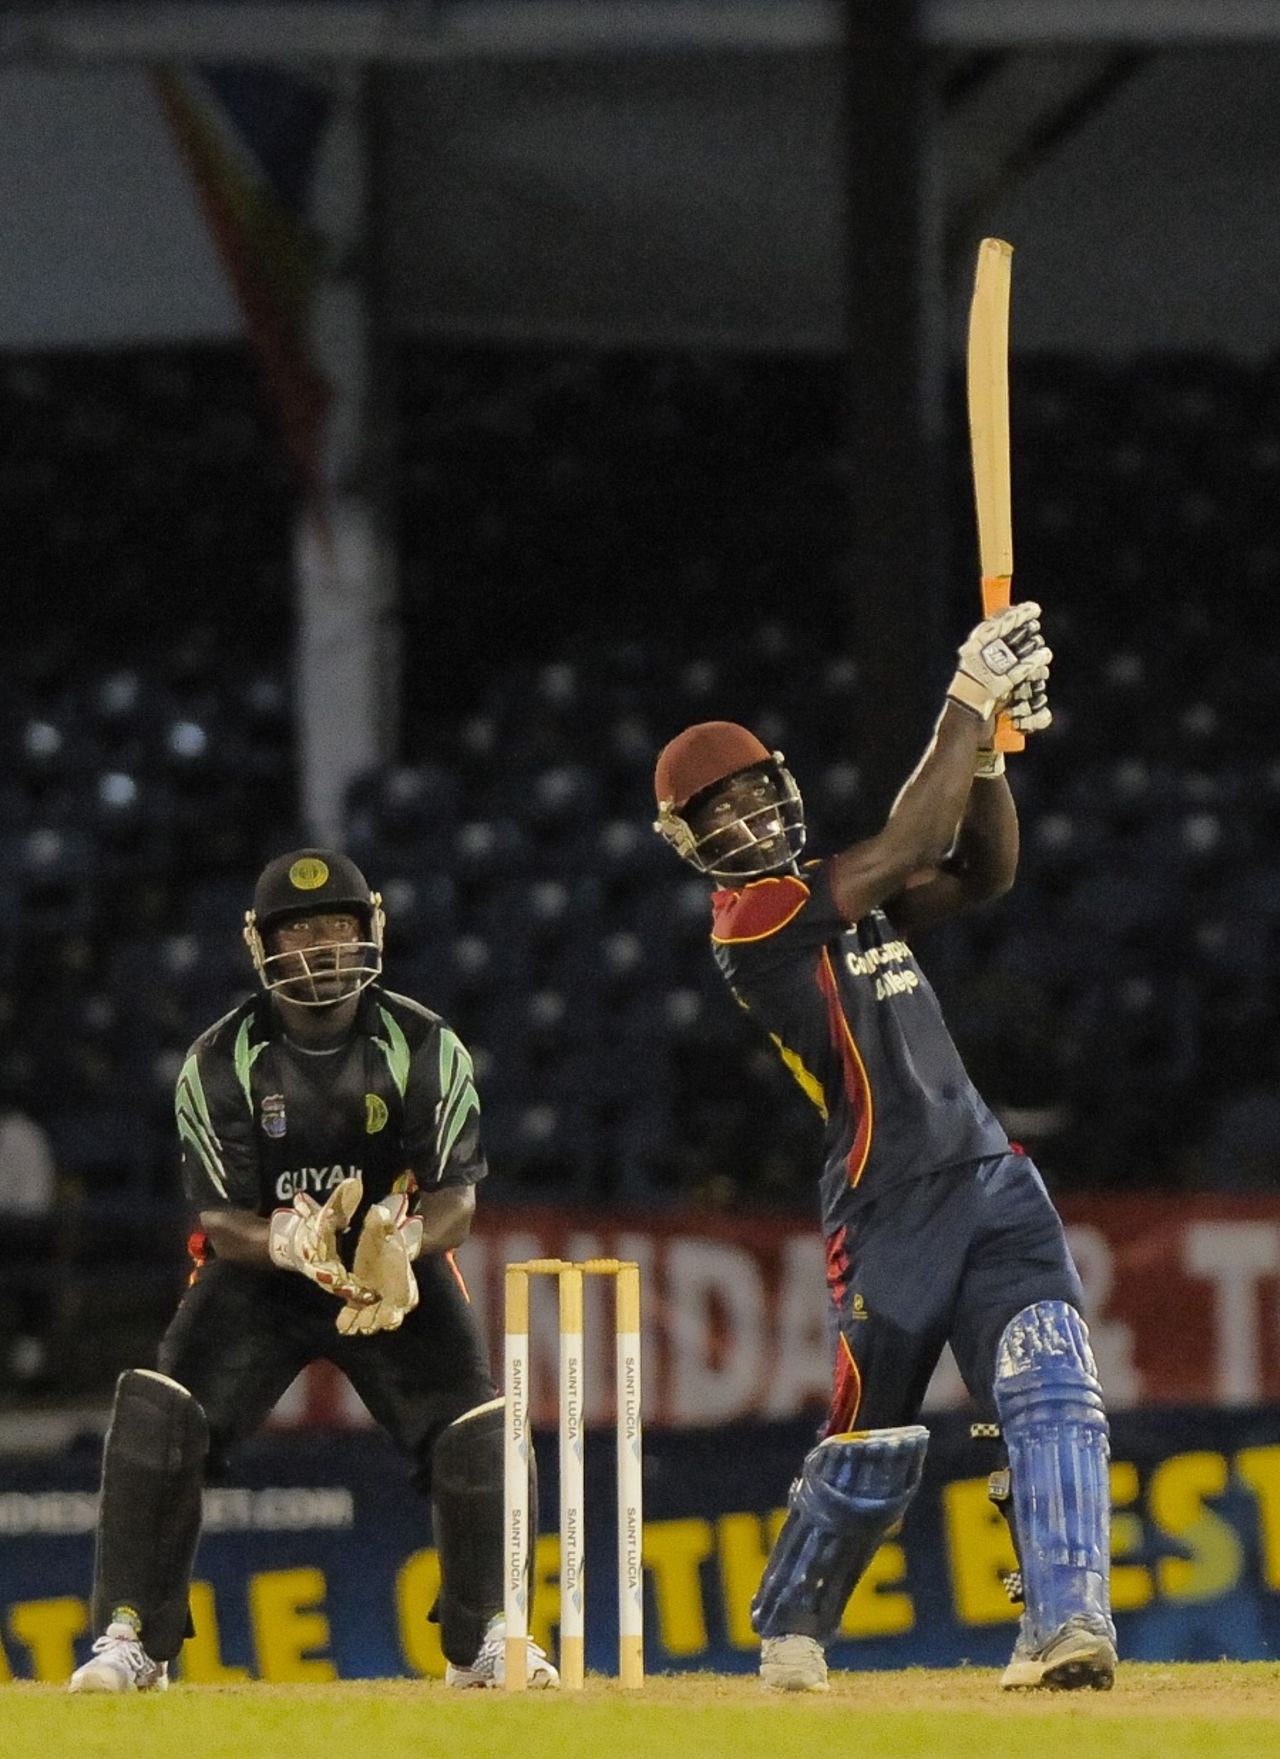 Chadwick Walton launches a six in the last over of the innings, Combined Campuses and Colleges v Guyana, Caribbean T20, Port of Spain, January 7, 2013